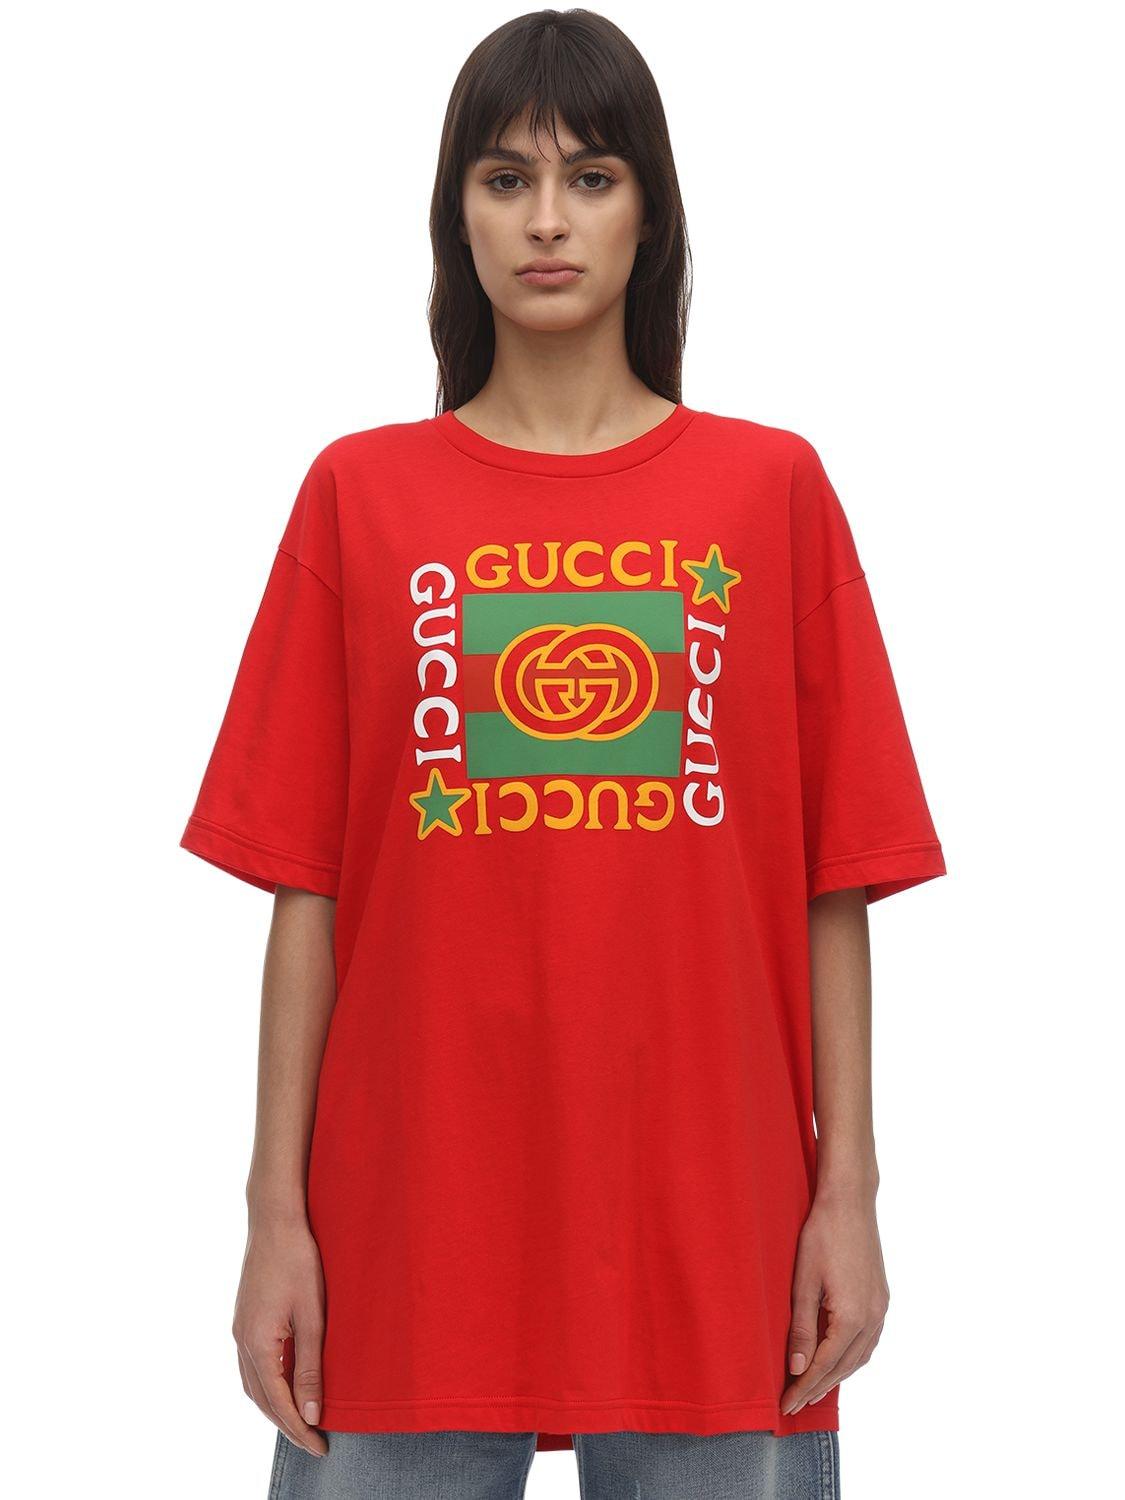 Gucci Star Logo T Shirt in Red - Save 42% - Lyst